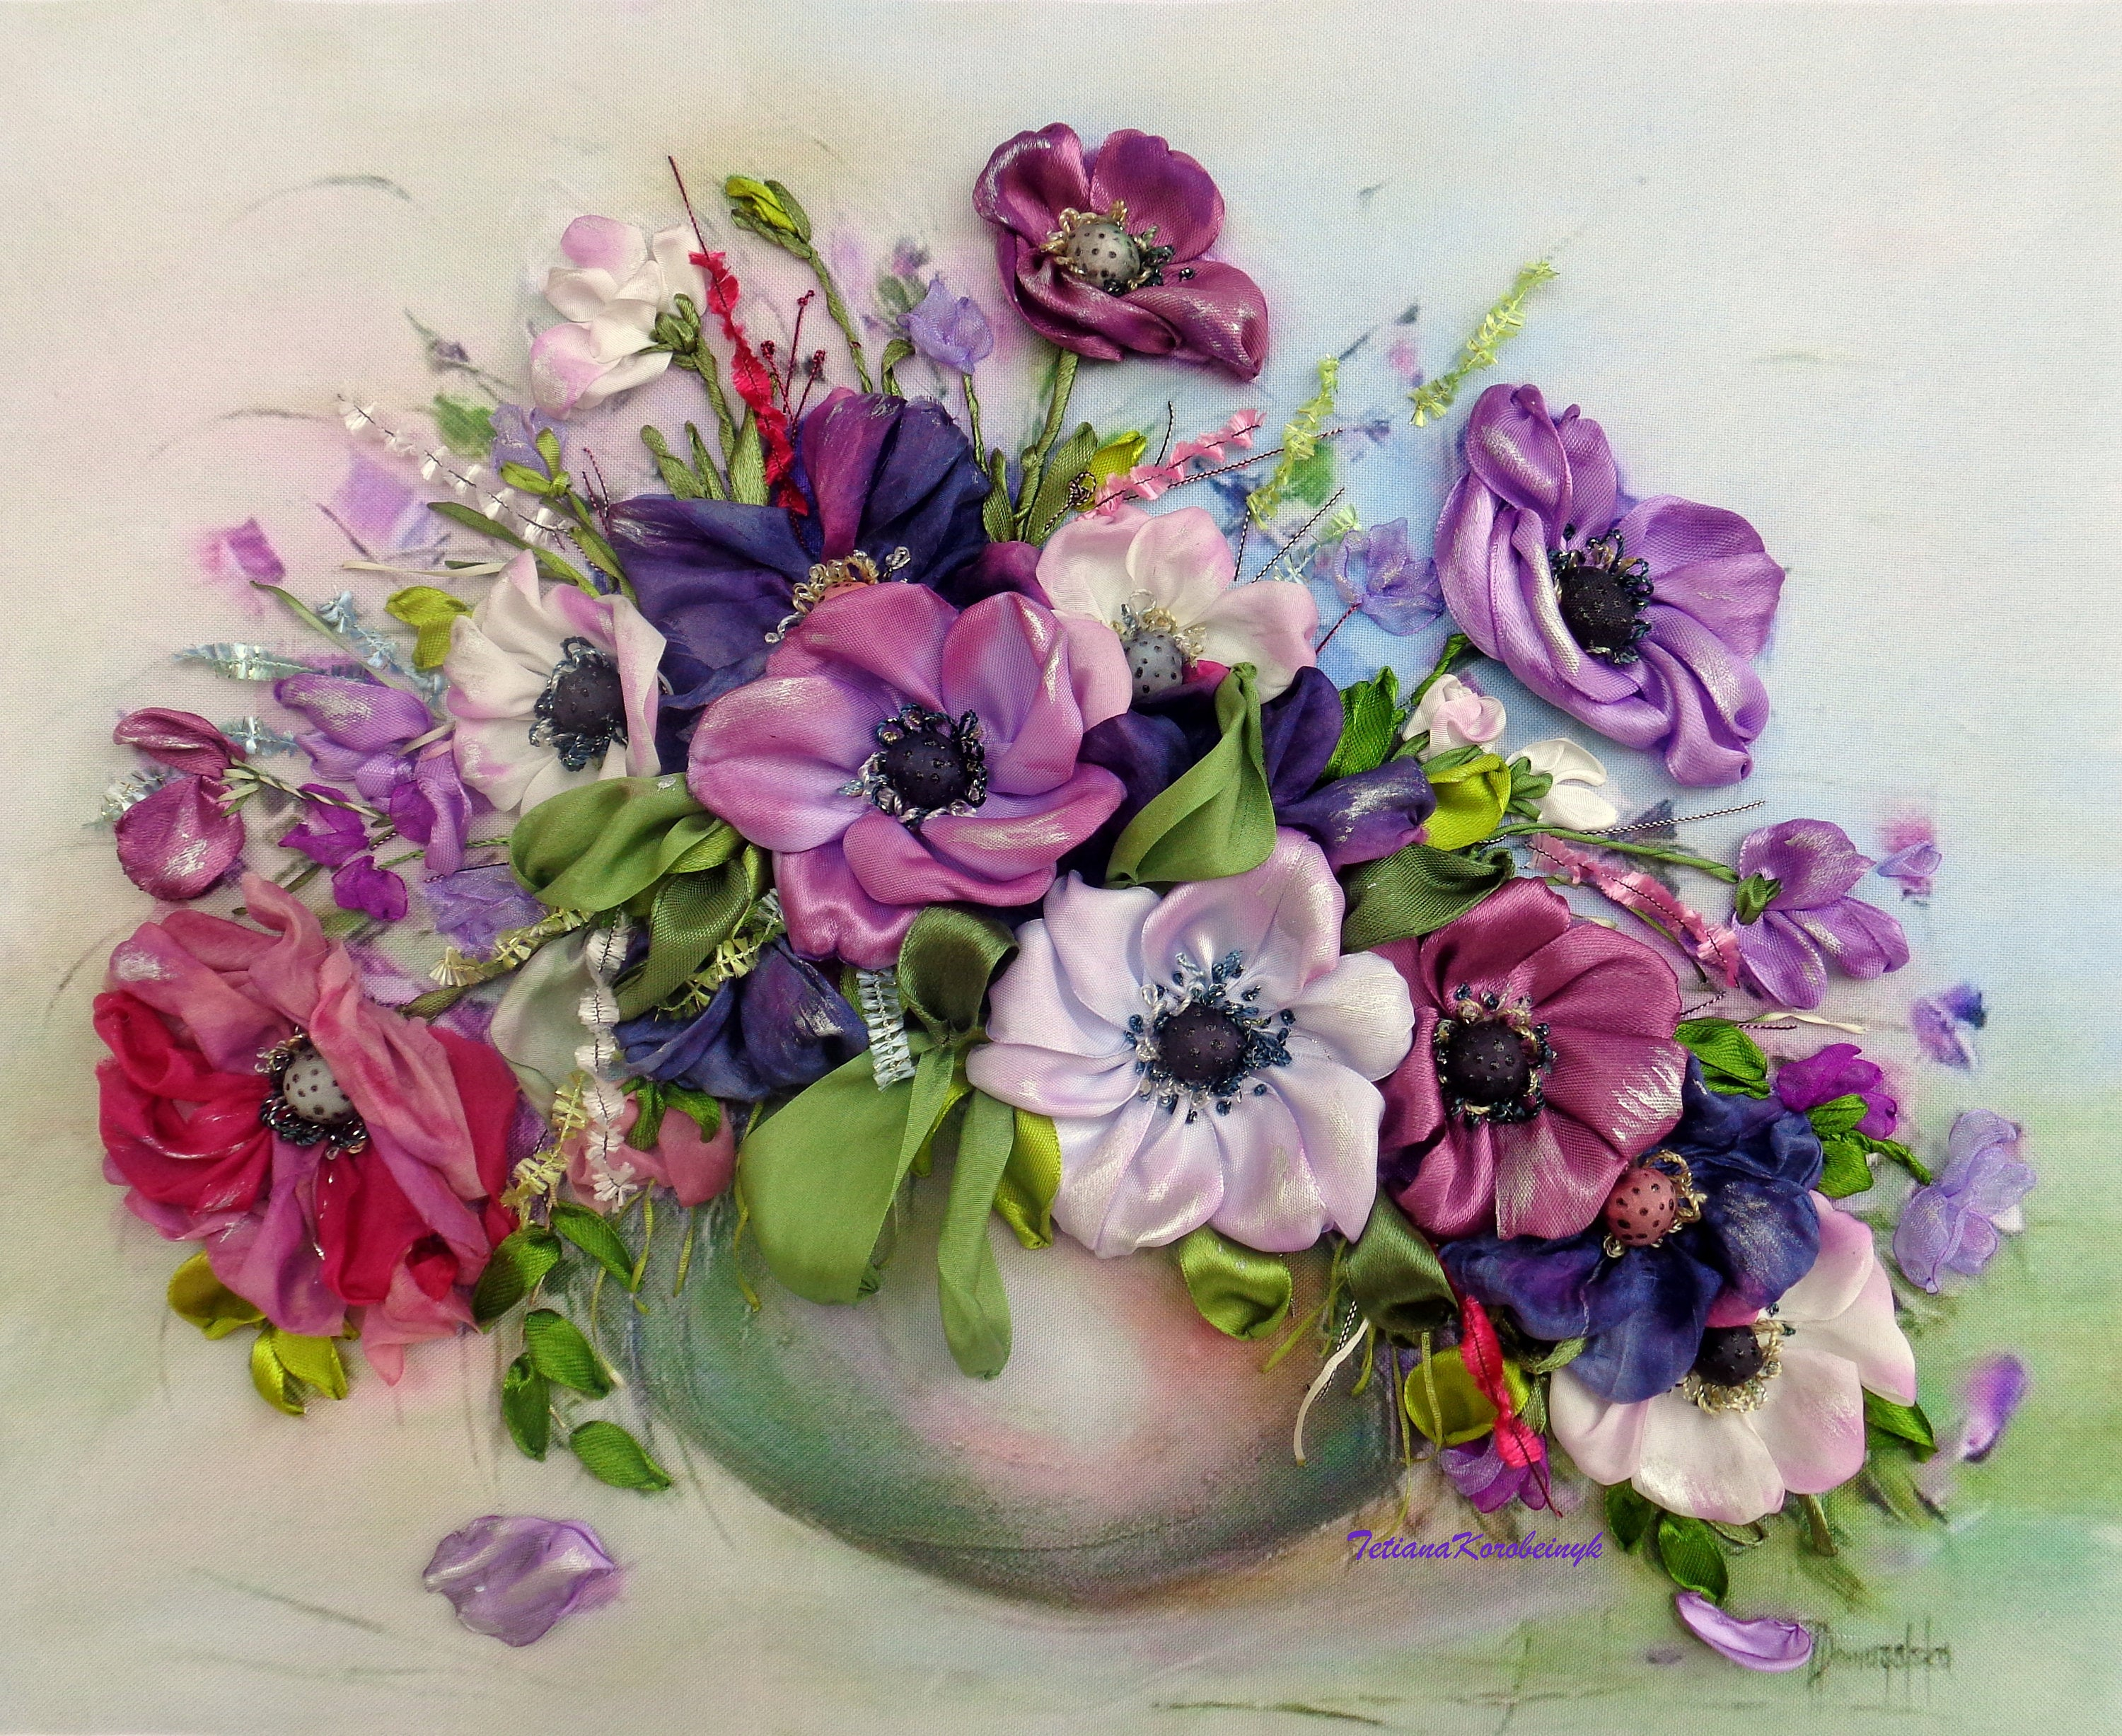 Silk Ribbon Embroidery Patterns Anemones Silk Ribbon Embroidery Pattern Purple White Pink Ribbon Embroidered Picture Ribbon Painting Ribbon Work 3d Embroidered Flower